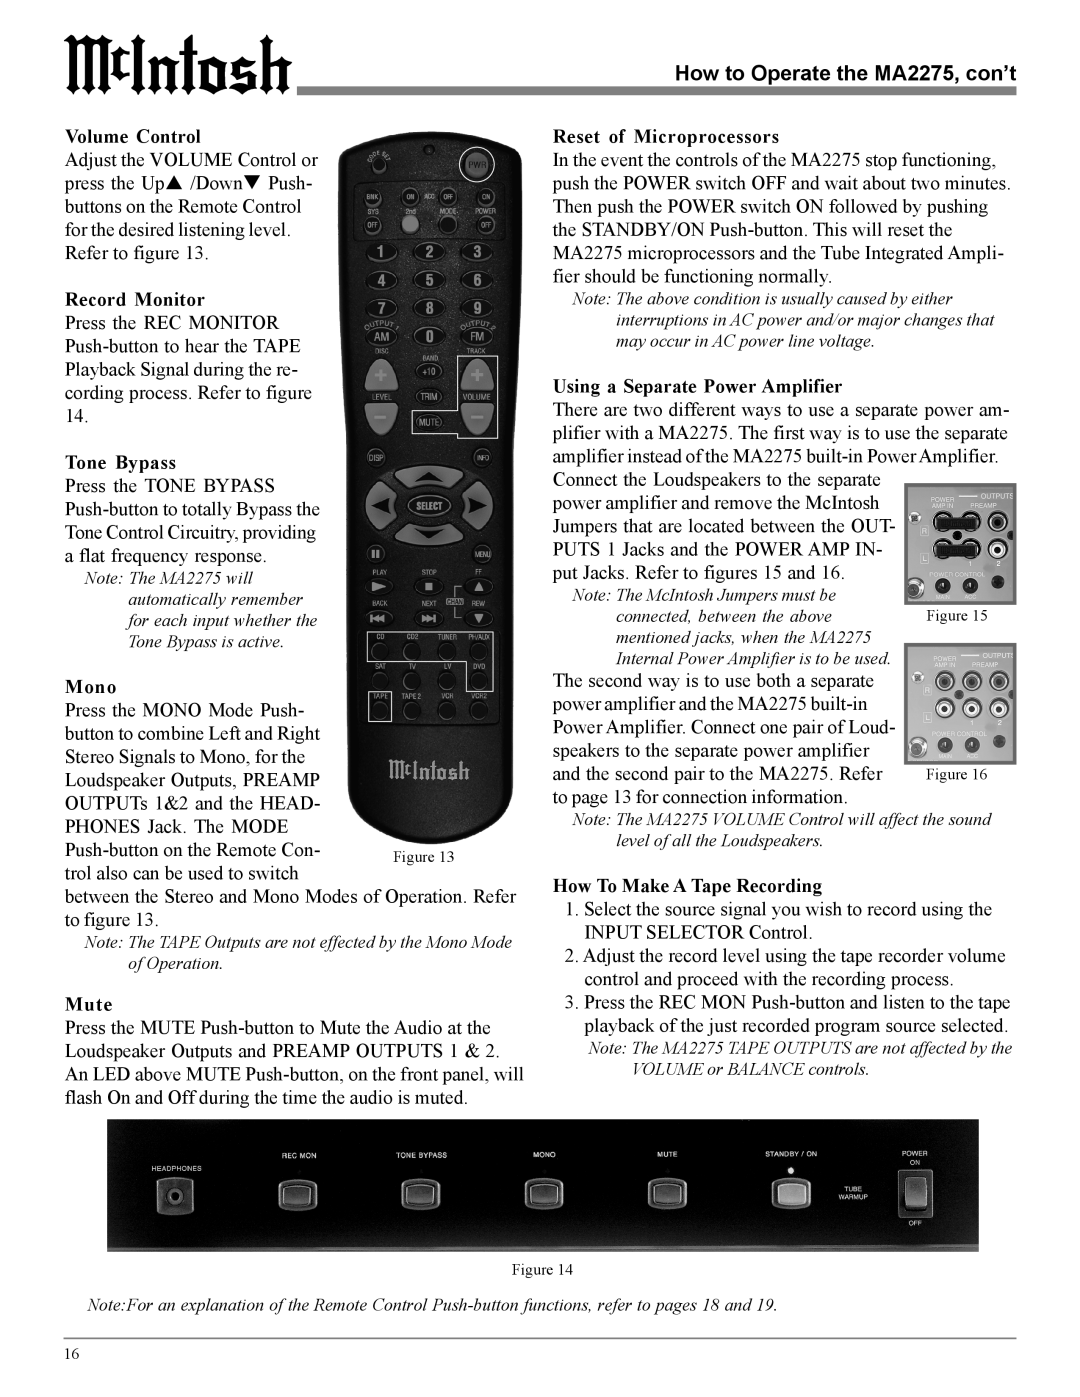 McIntosh How to Operate the MA2275, con’t, Volume Control, Record Monitor, Tone Bypass, Mute, Reset of Microprocessors 